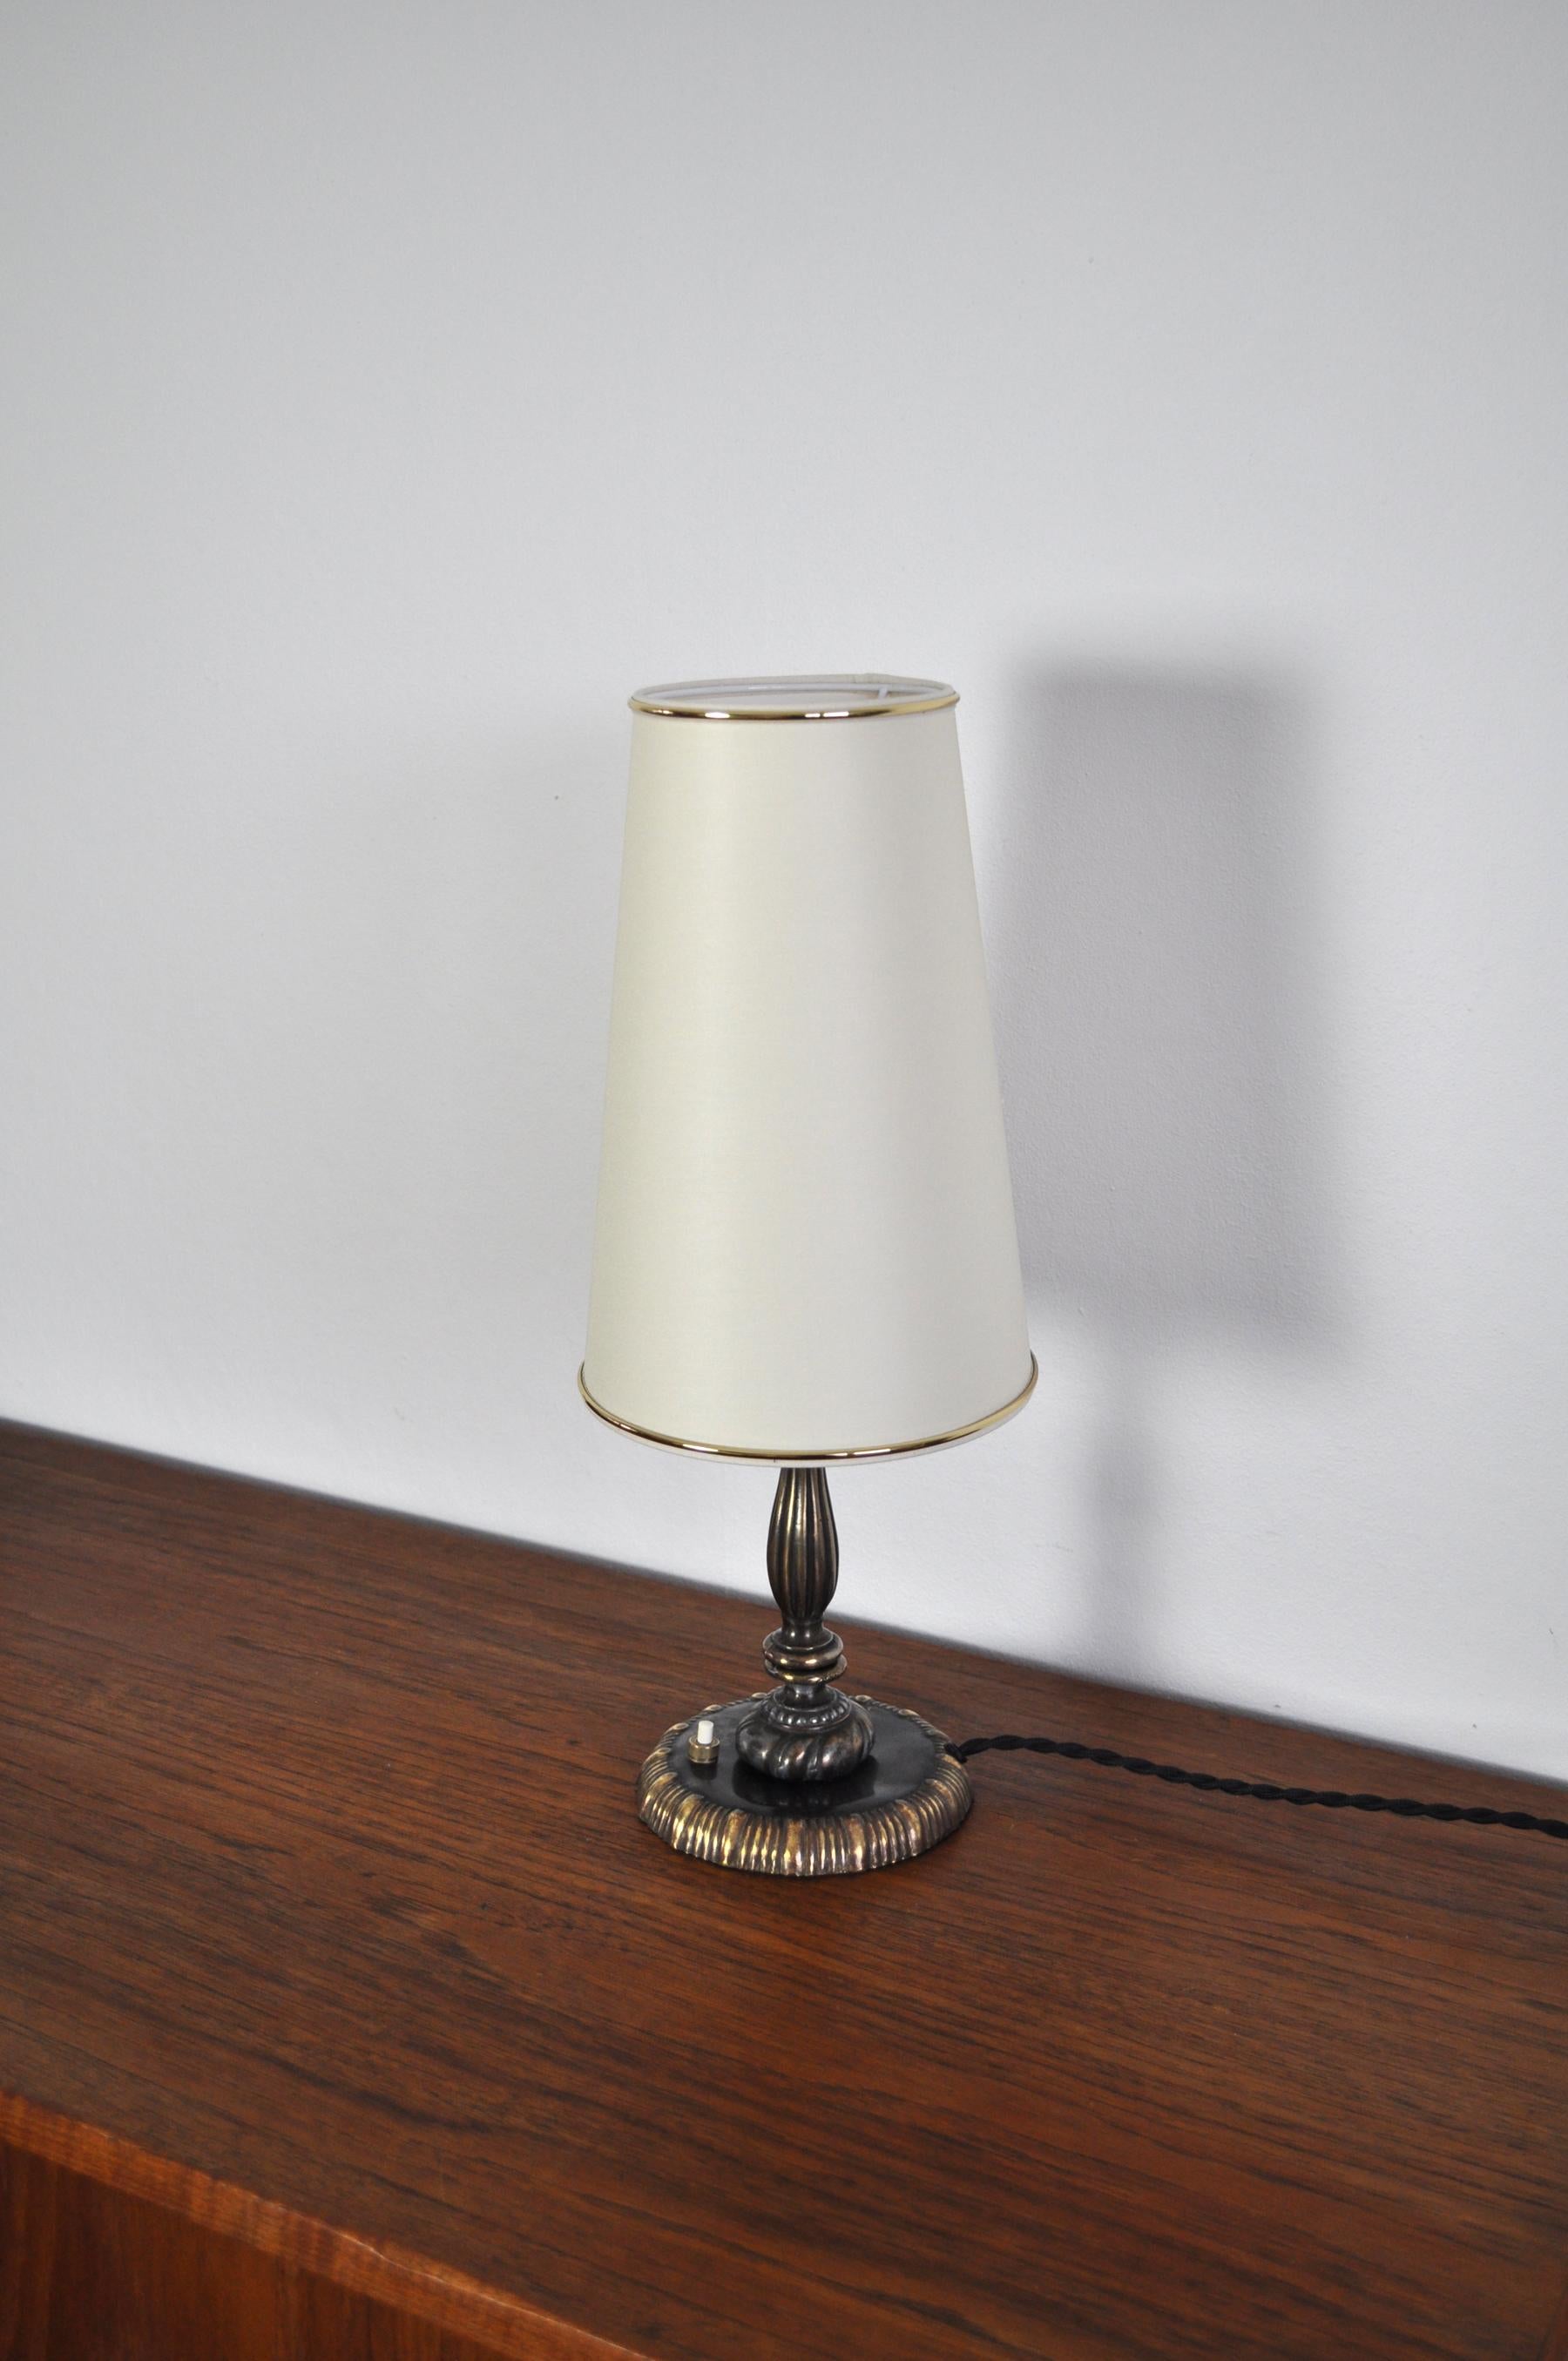 Danish Art Nouveau Table Lamp Early 20th Century For Sale